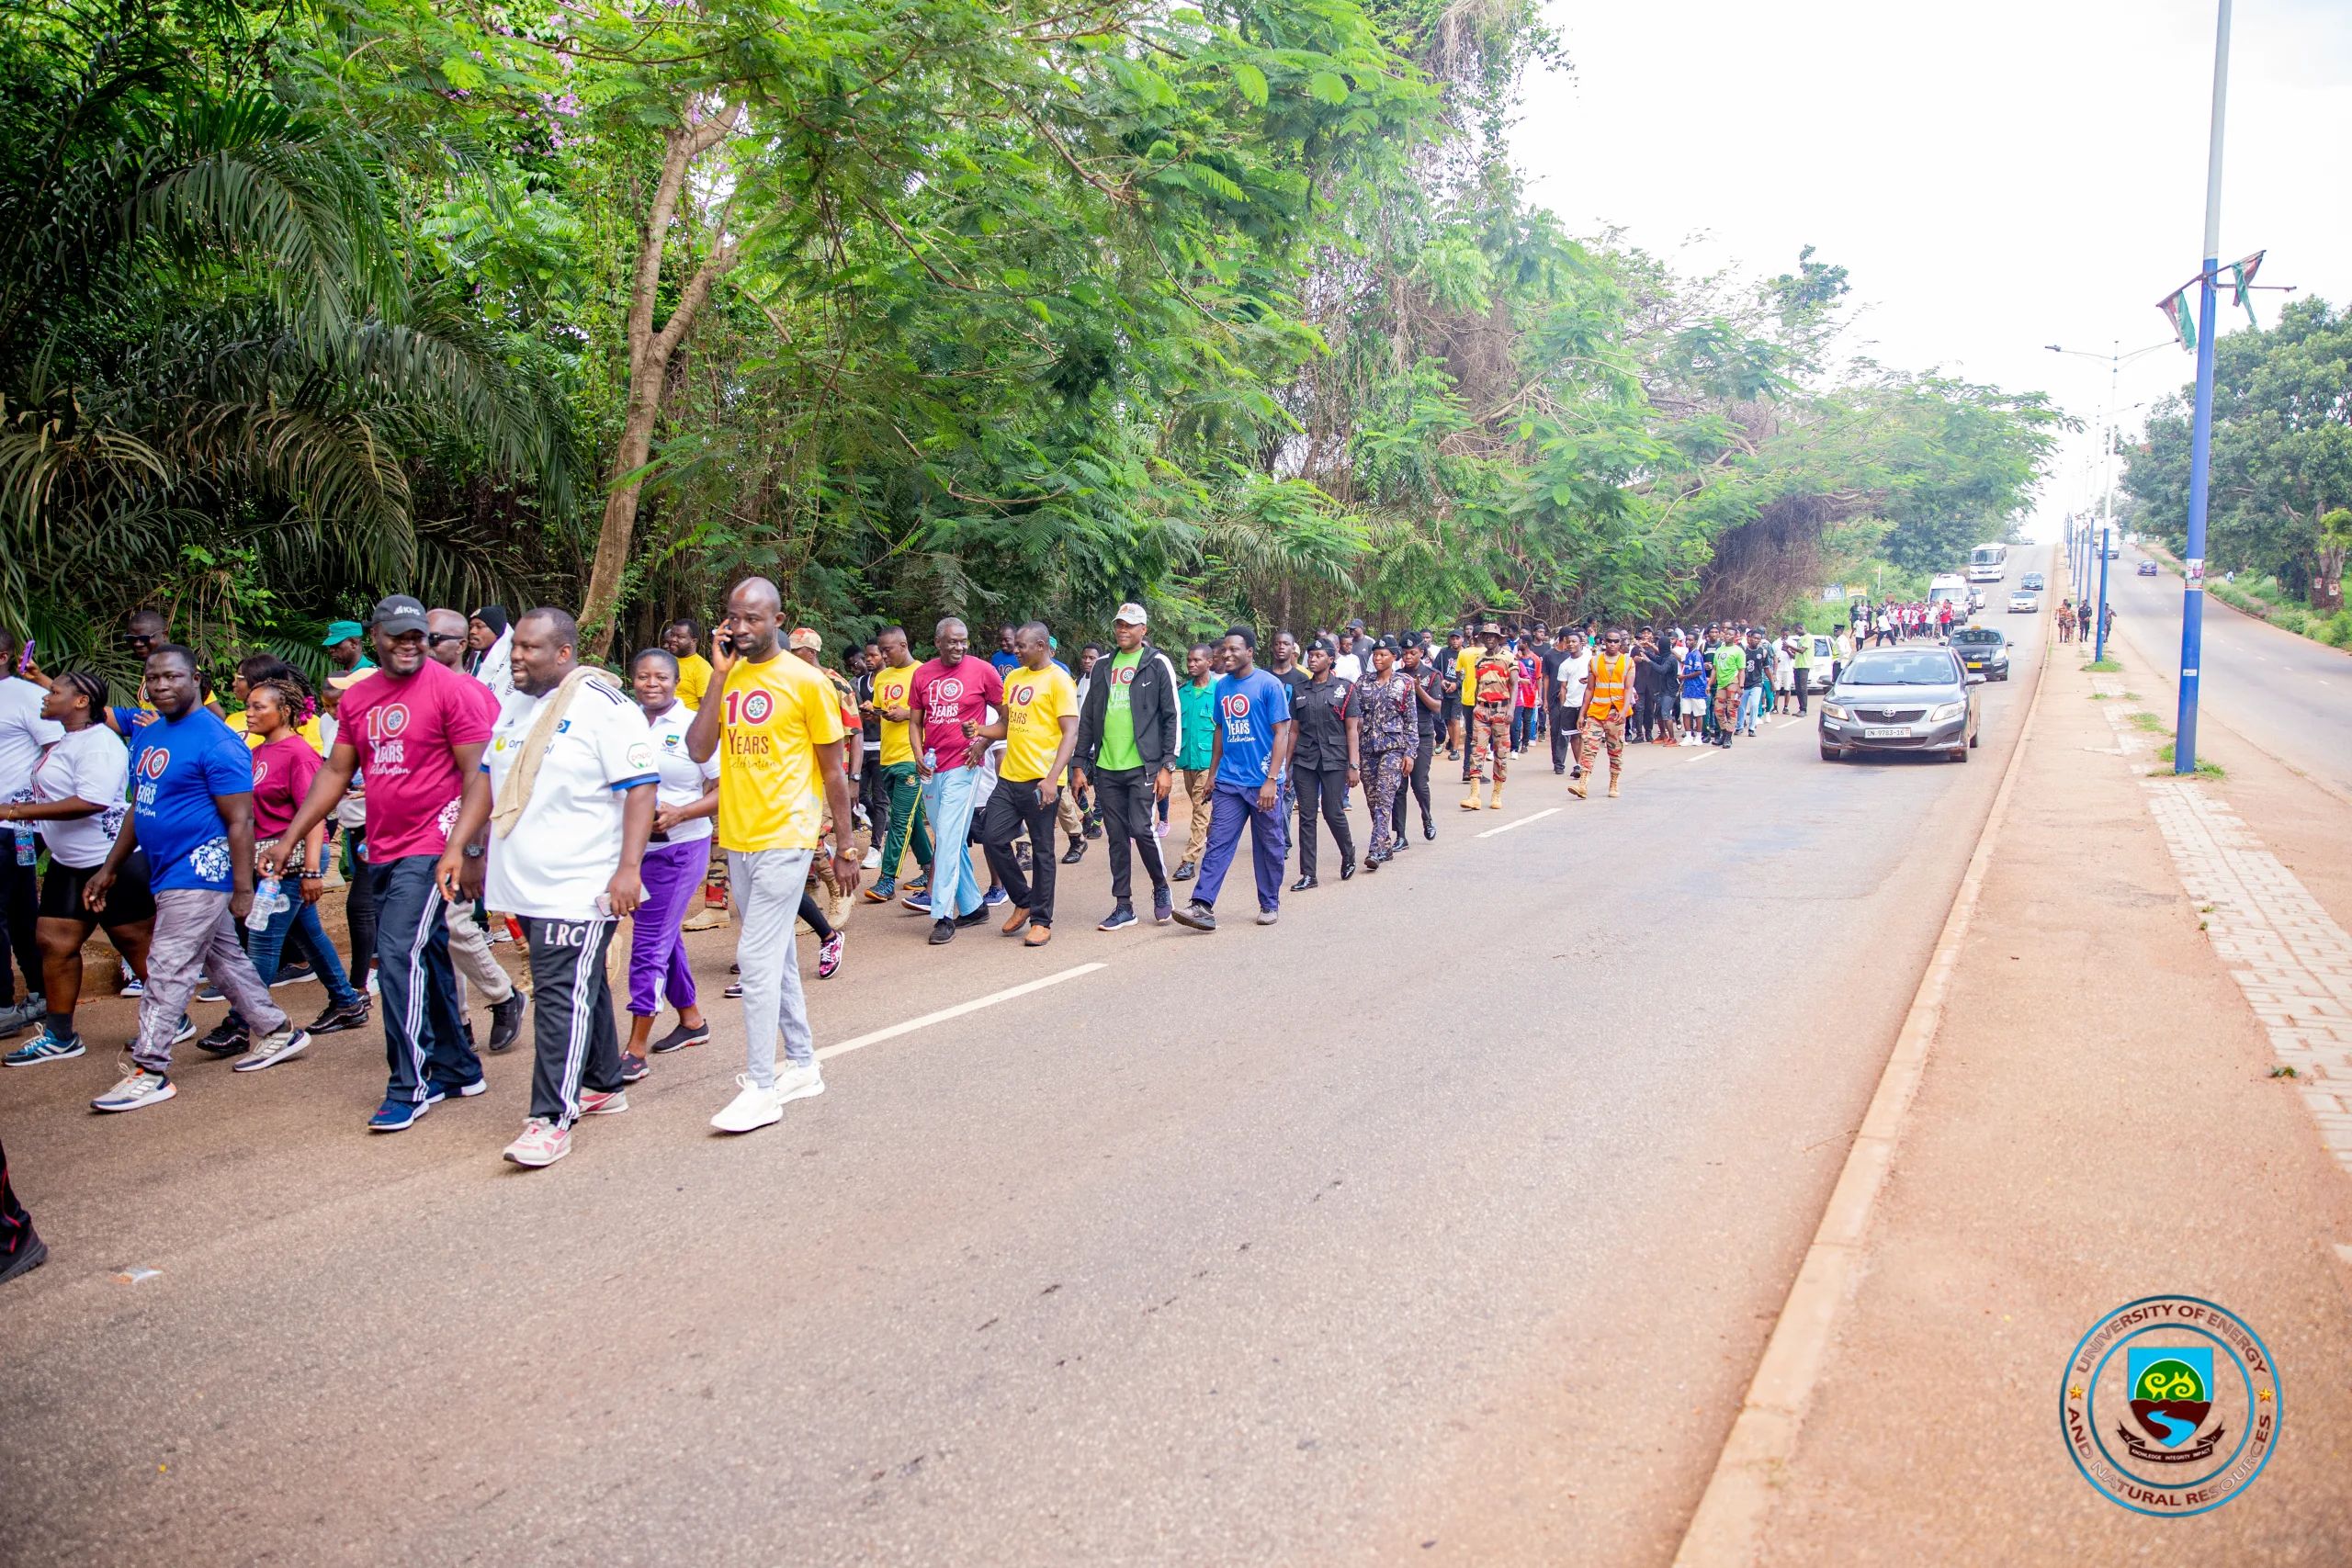 UENR Embarks on 2nd Health Walk Ahead of 10th Anniversary Grand Durbar and 7th Congregation , University of Energy and Natural Resources - Sunyani